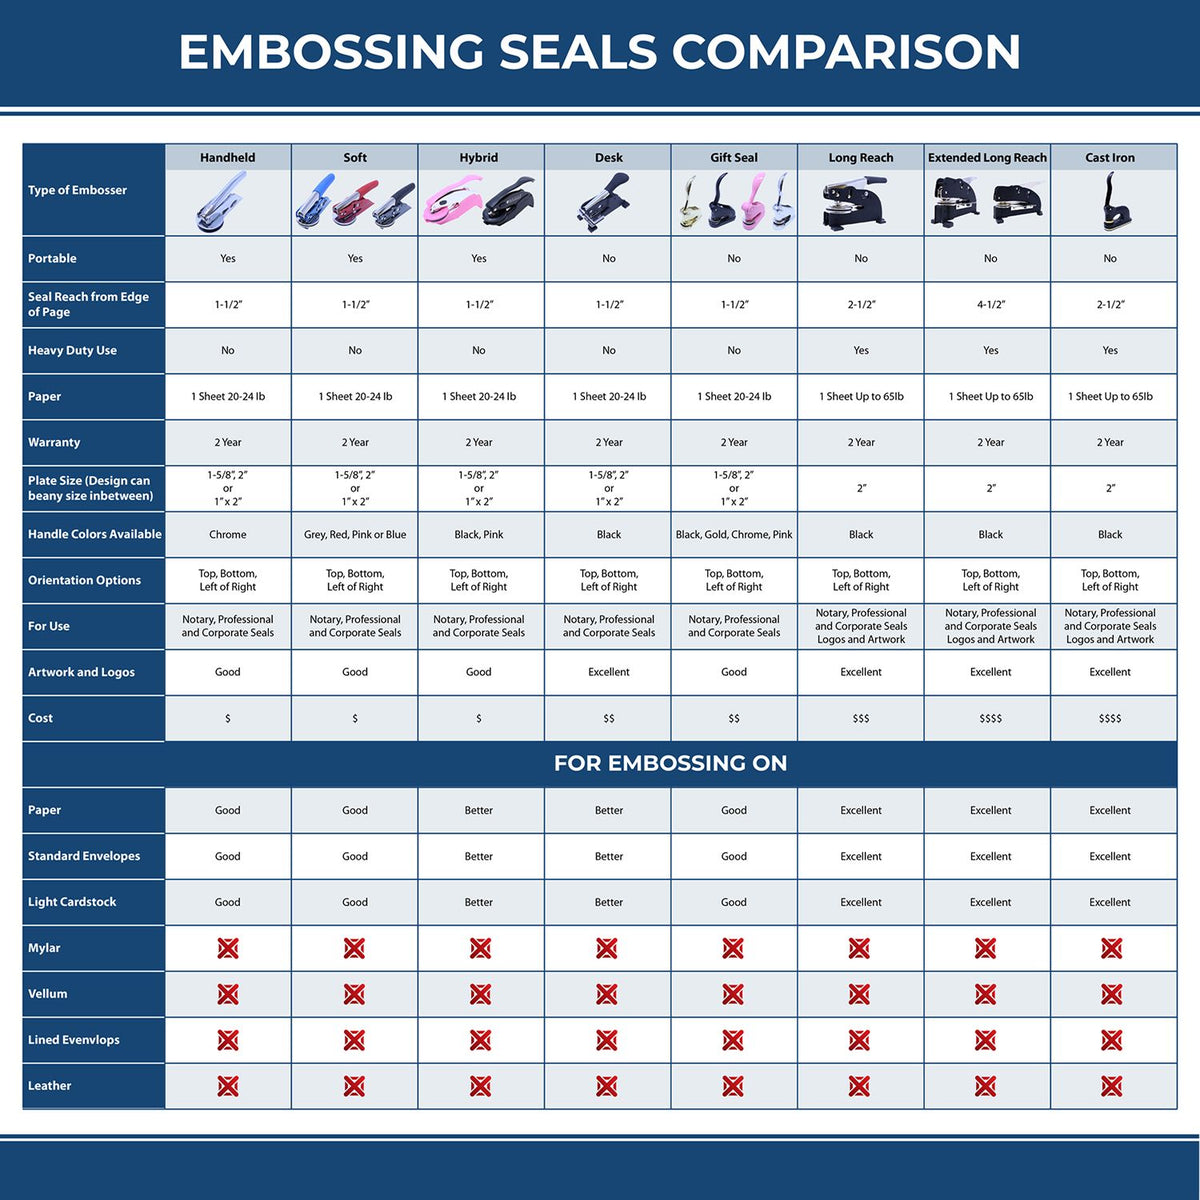 A comparison chart for the different types of mount models available for the Soft Pocket Iowa Landscape Architect Embosser.